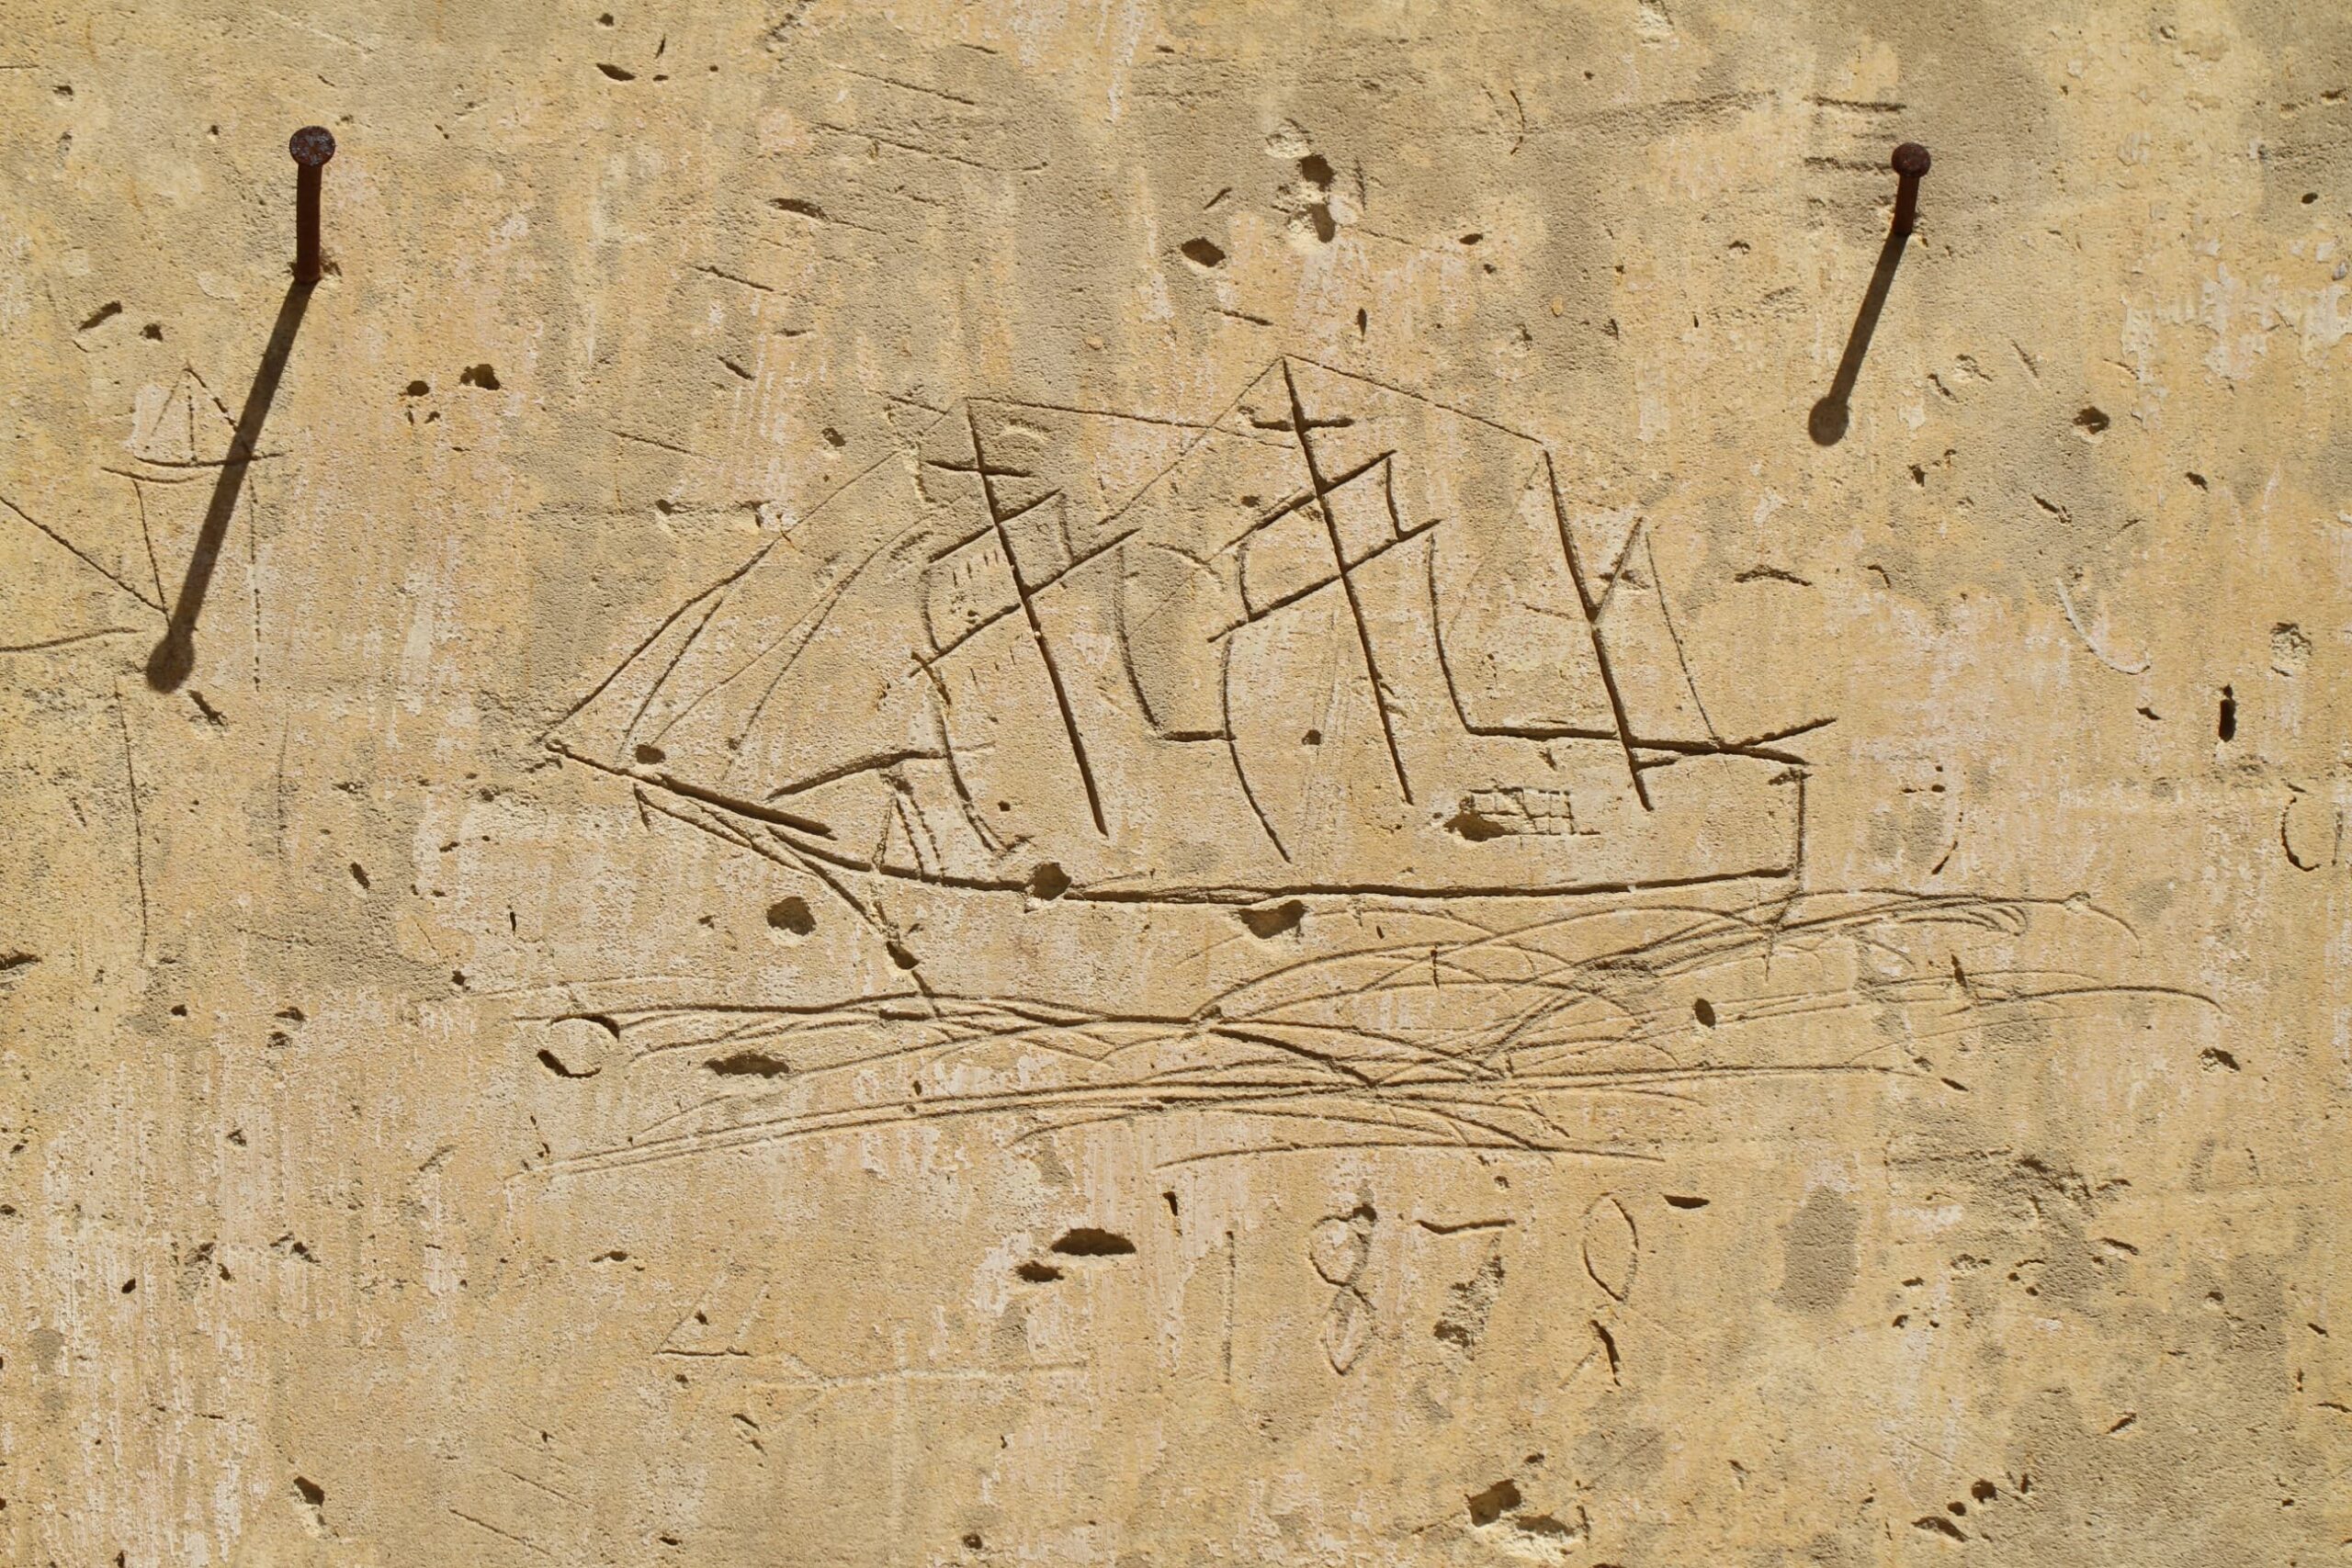 A three-dimensional depiction of a square rigged ship. The ship appears as heaving to portside. The numbers ‘1879’ etched under the graffito are probably related to the ship graffito.